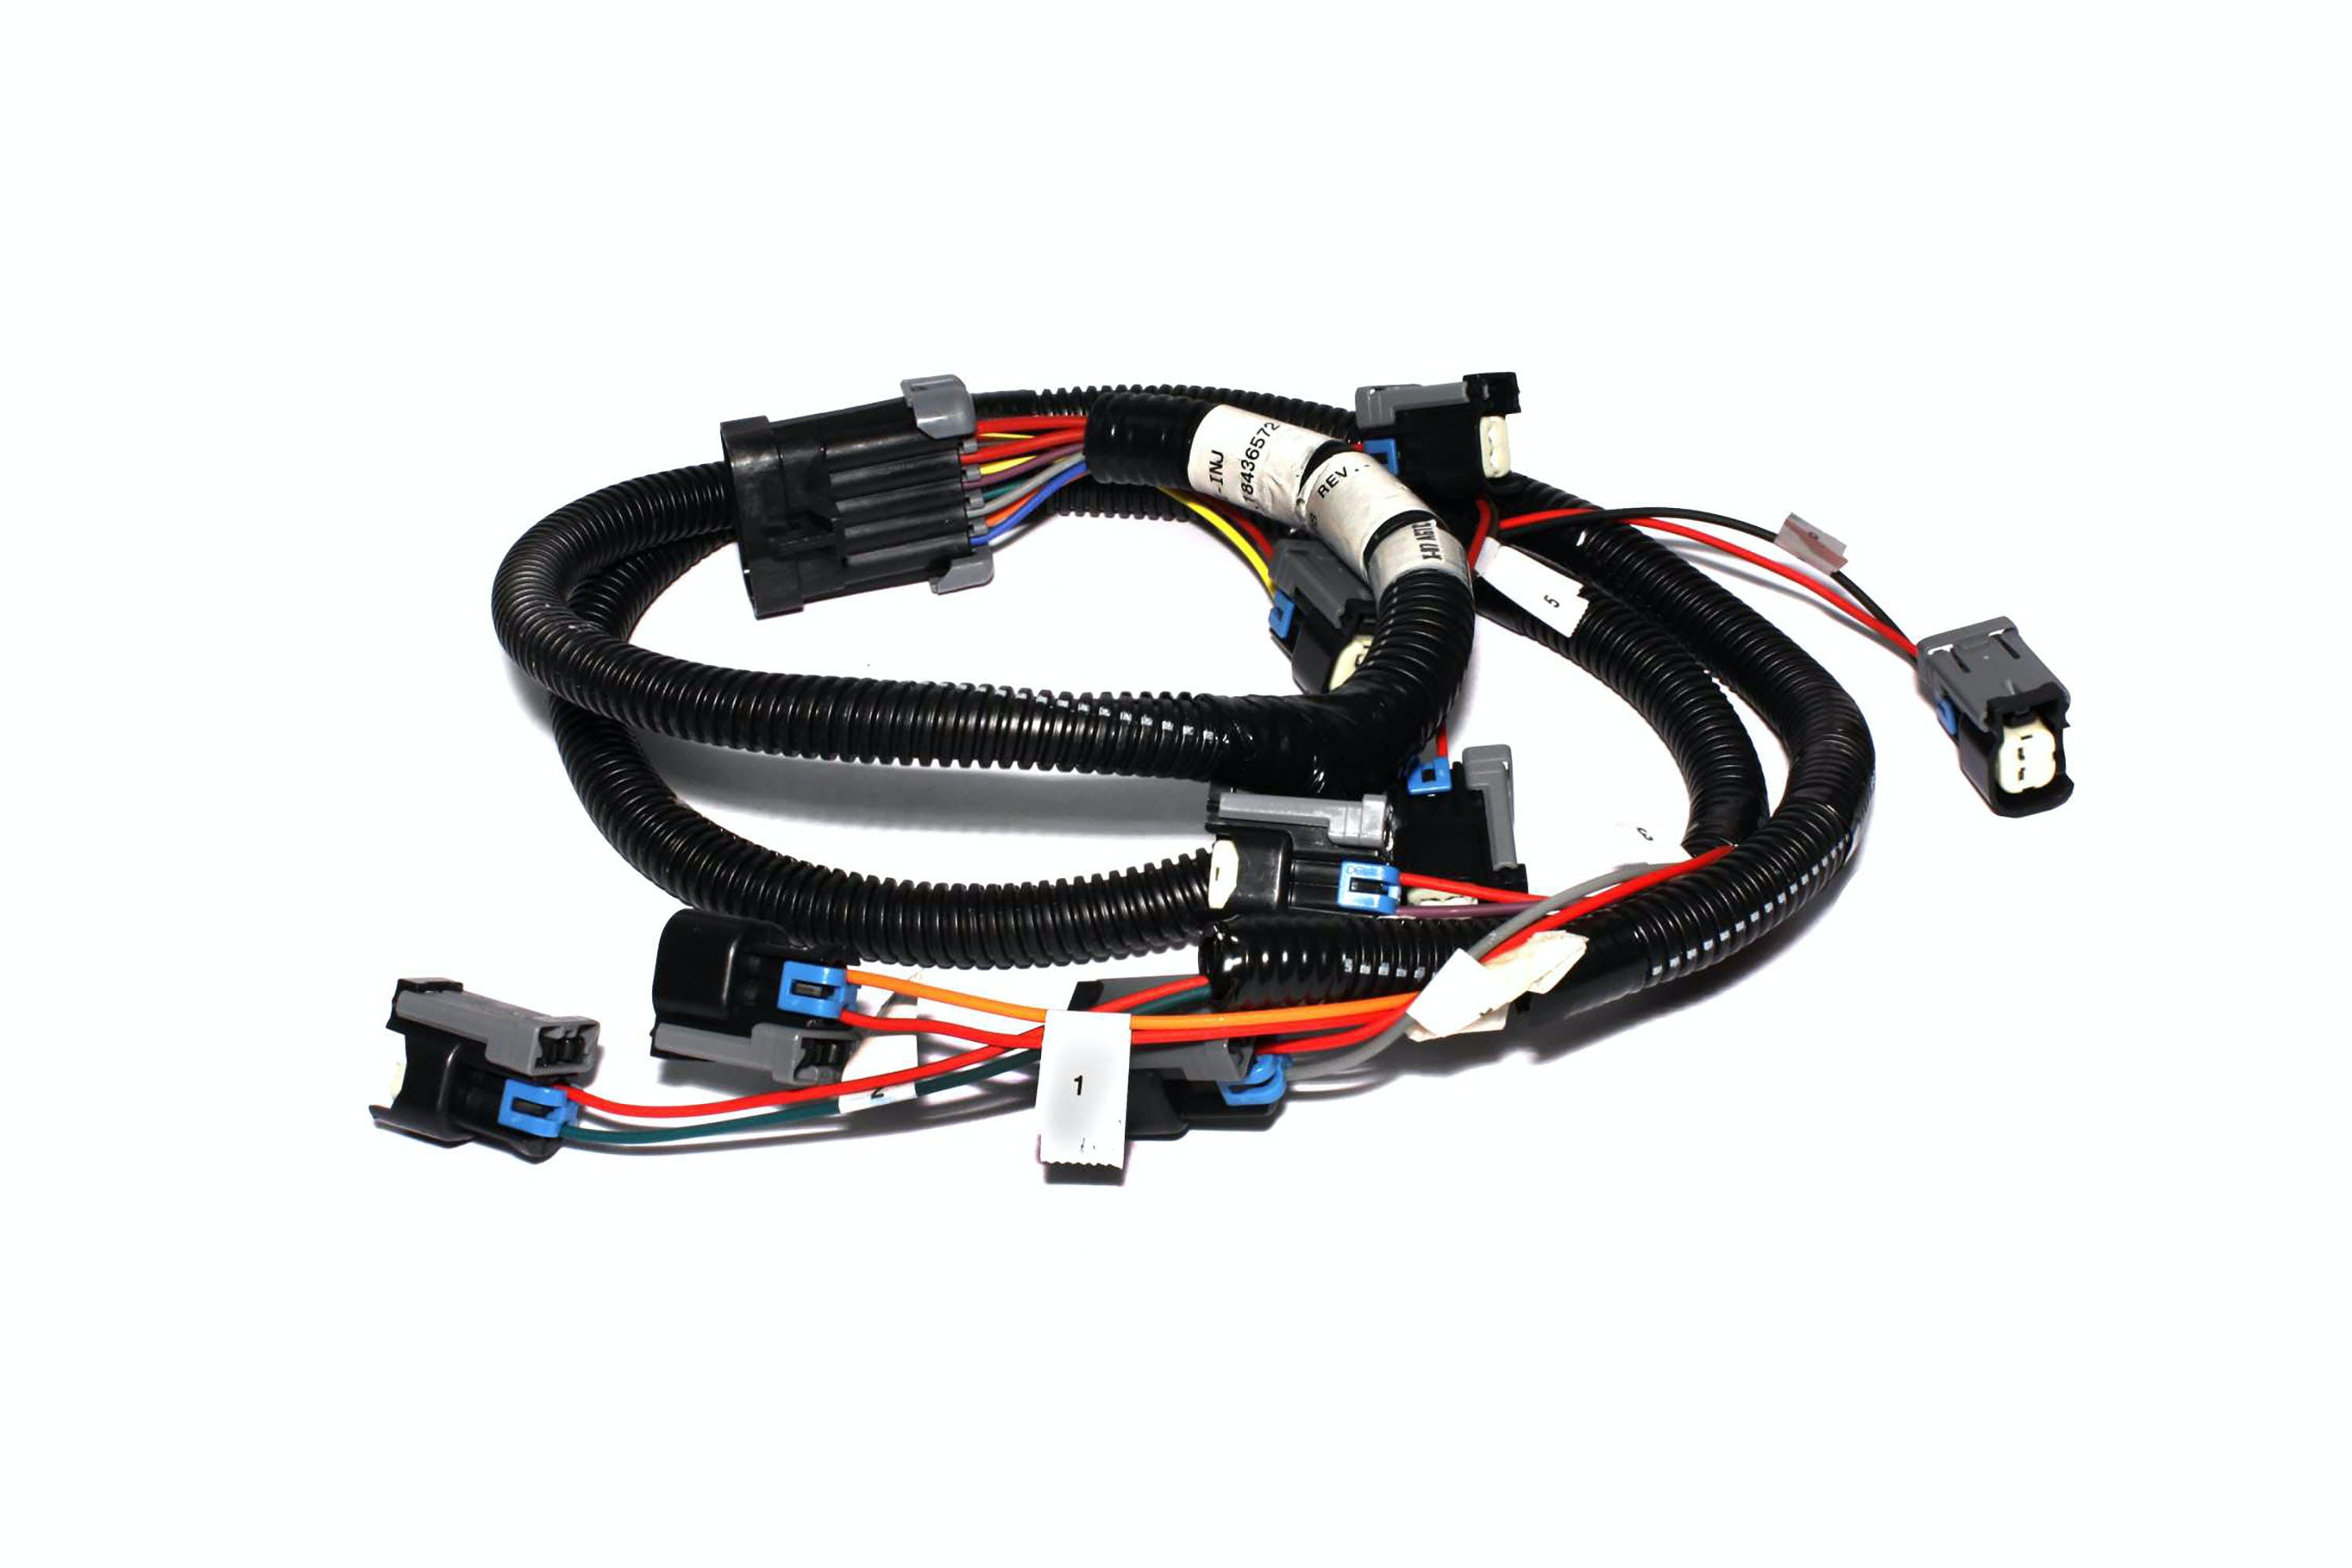 FAST - Fuel Air Spark Technology 301208 XFI Fuel Inector Harness for Chrysler Modern  5.7L/6.1L/6.4L Hemi engines.